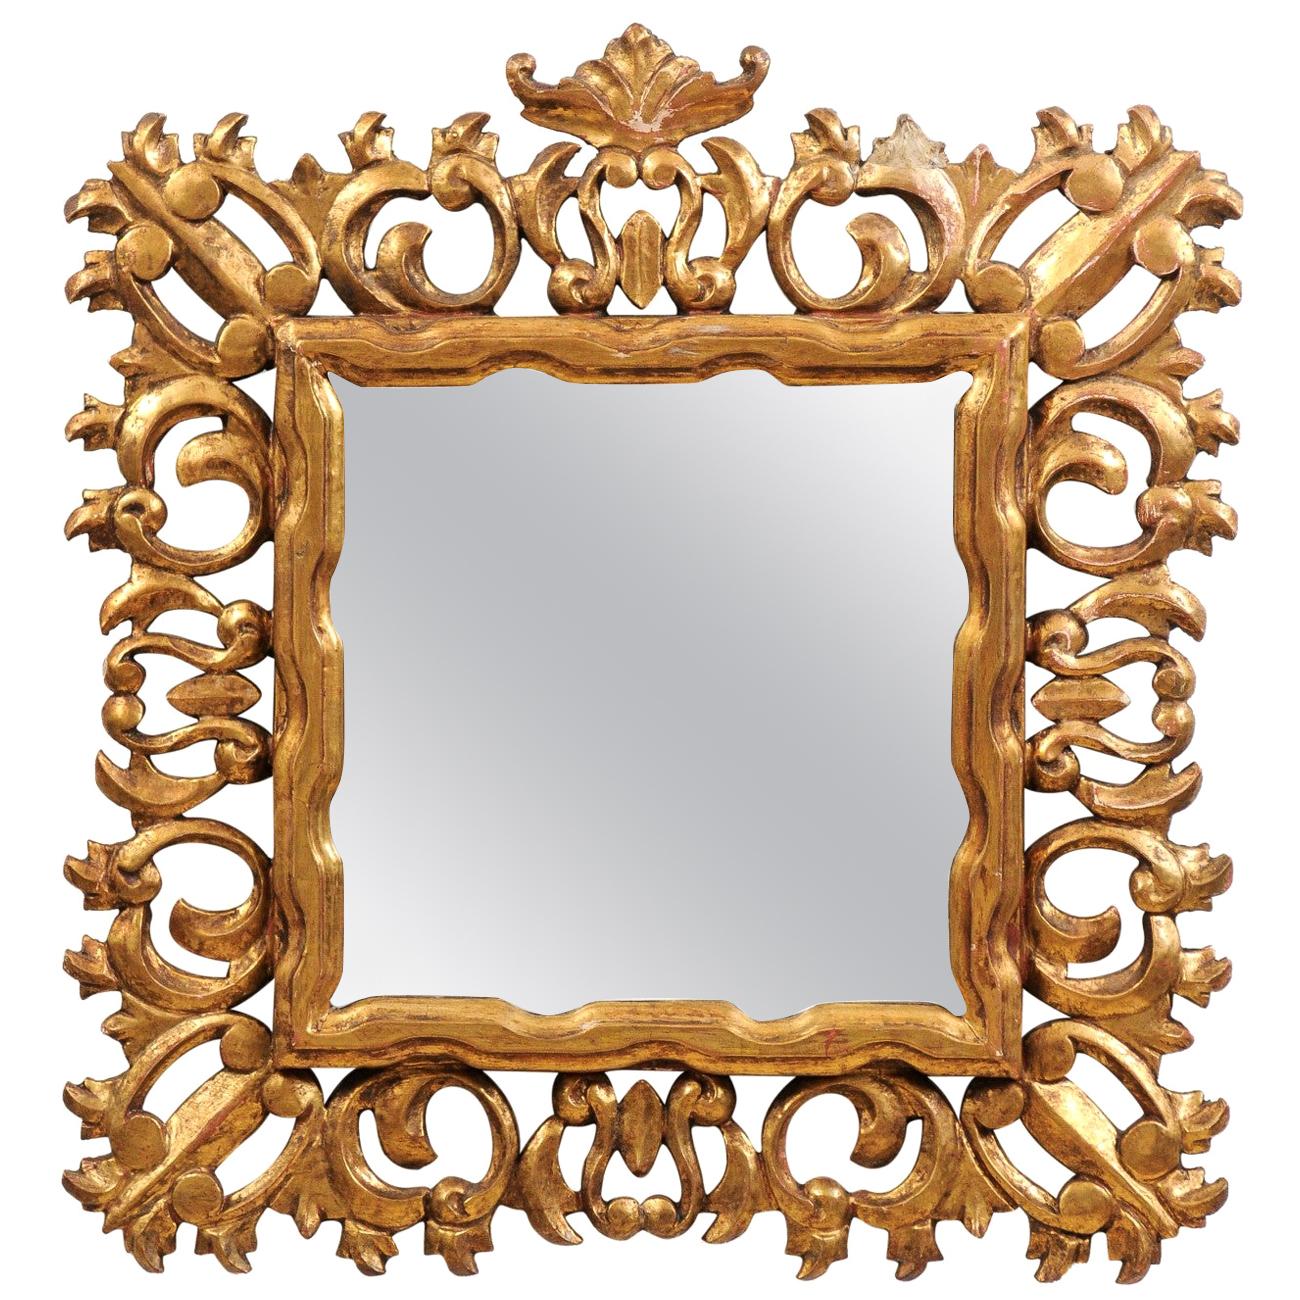 Florentine 20th Century Carved Giltwood Mirror with C-Scrolls and Foliage Motifs